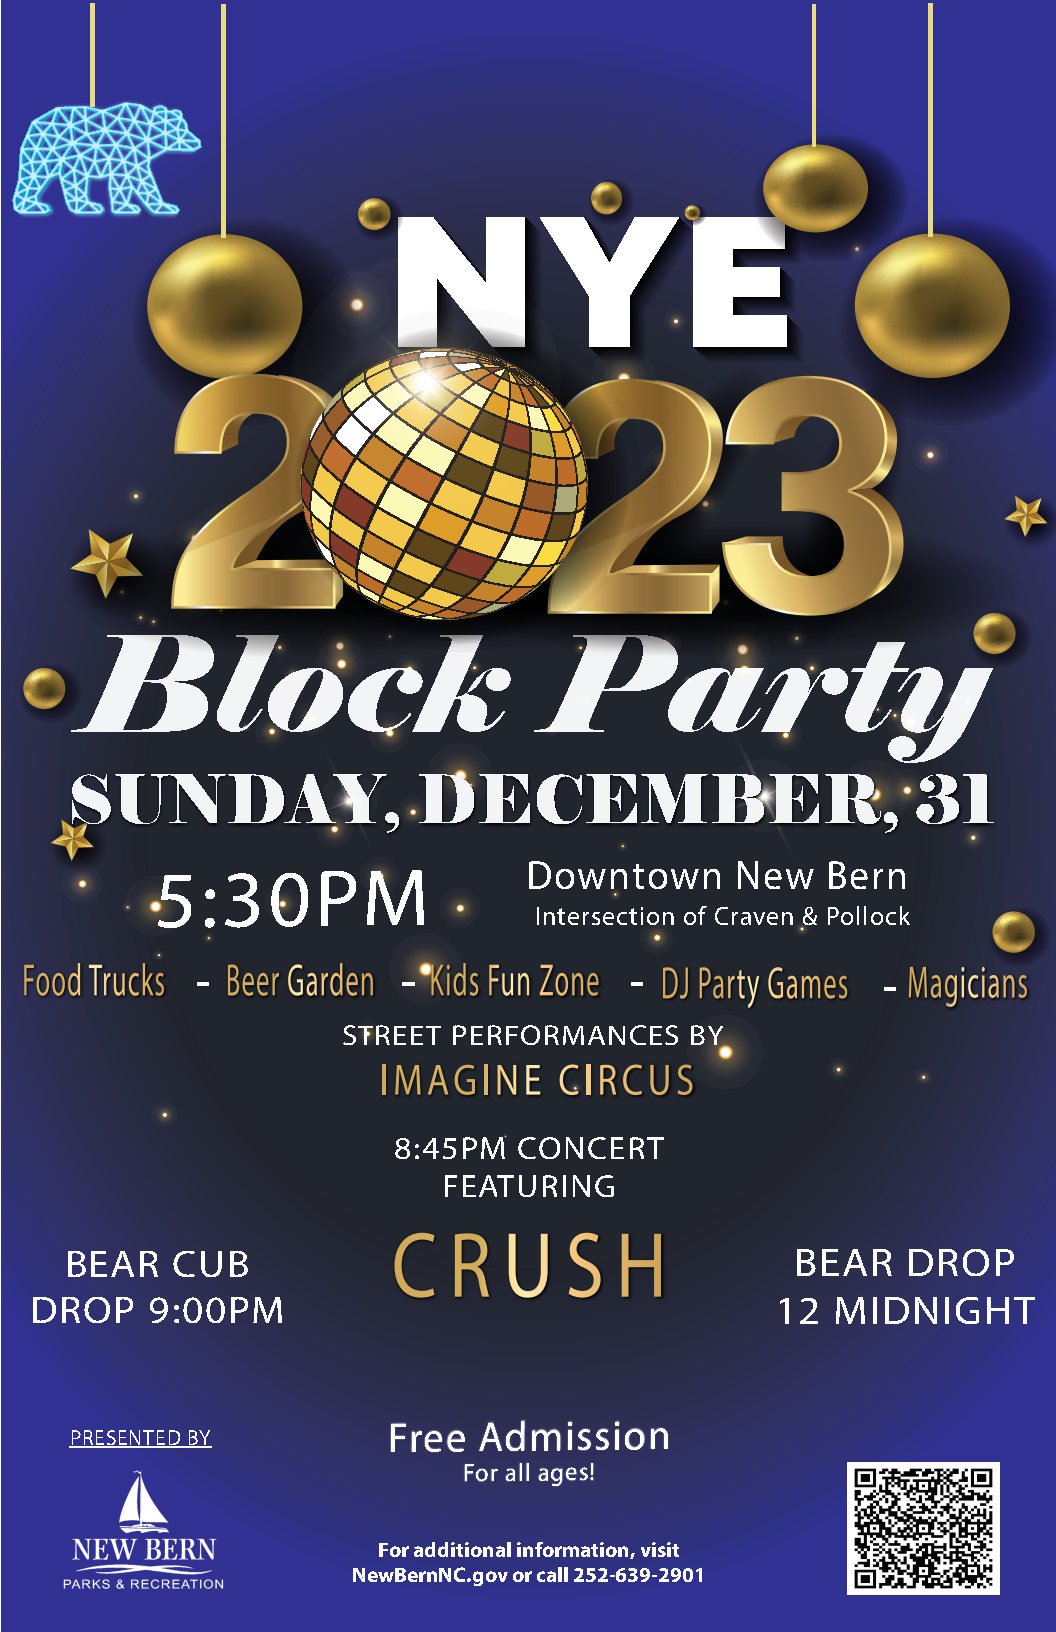 New Year’s Eve Block Party in Downtown New Bern